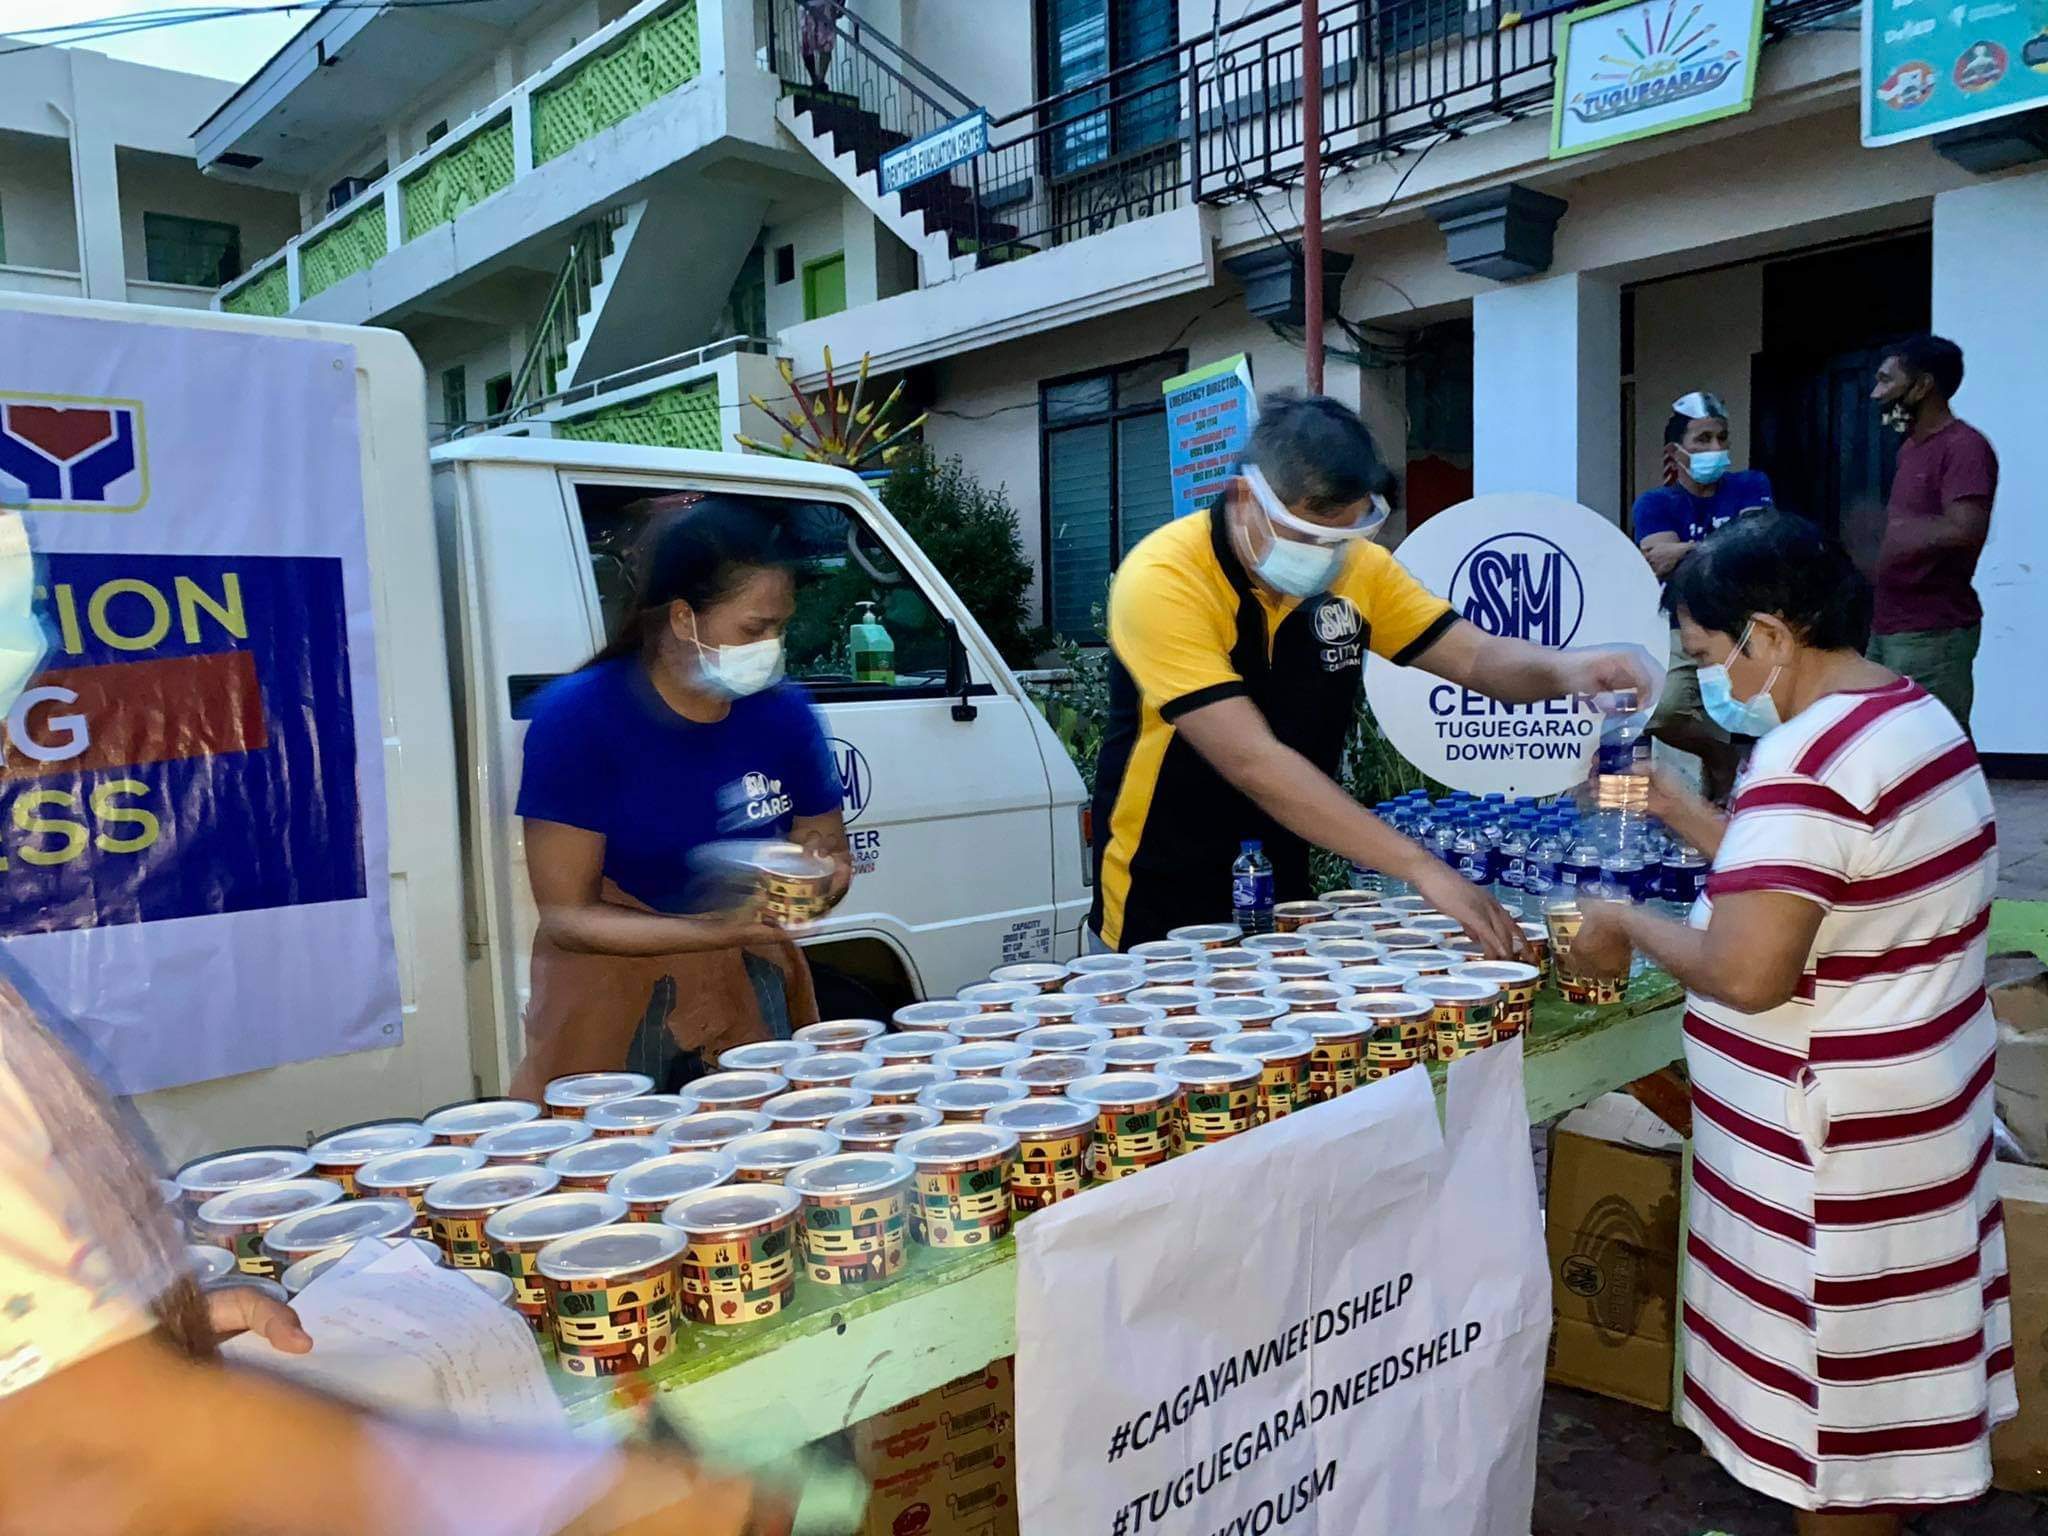 SM, through its OPTE program, provides relief support to Typhoon Ulysses victims